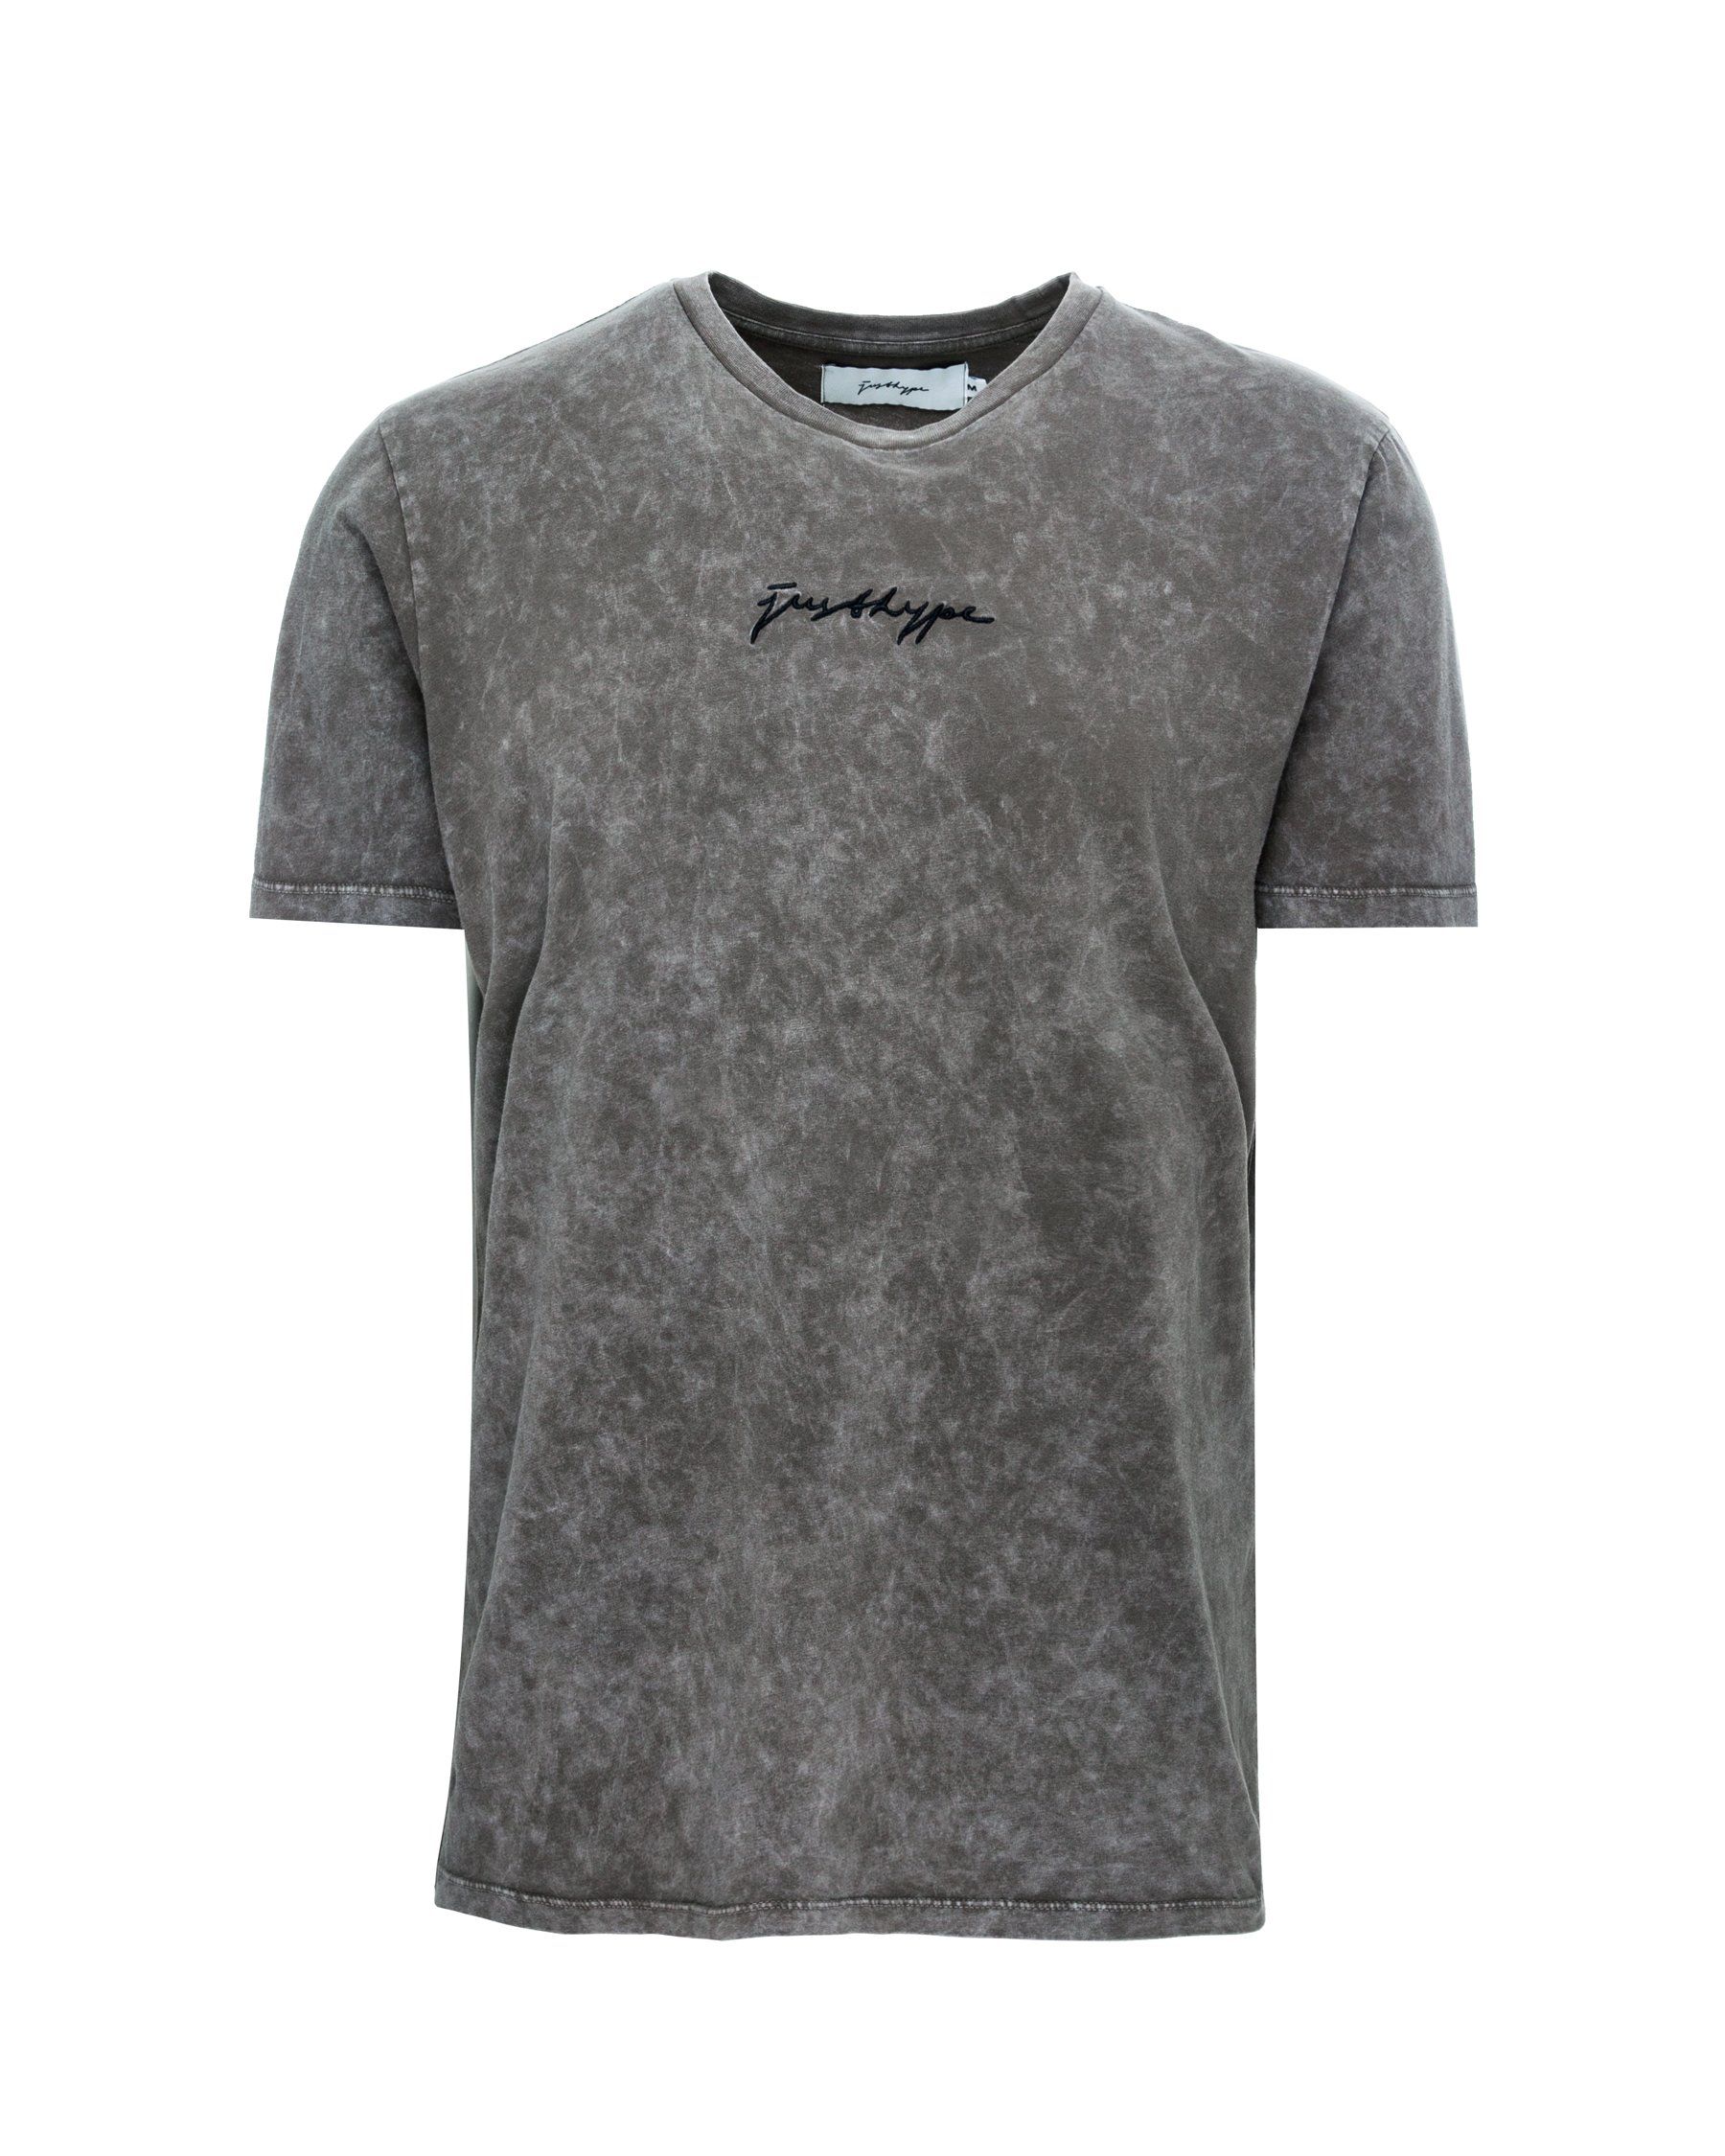 The HYPE. Sunset Rose Men's T-shirt boasts a washed vintage acid grey colour palette. With a crew neckline and short sleeves for a classic fit in our standard men's tee shape. The design features an enlarged back graphic with an on-trend blue rose. Boasting a 100% cotton fabric base for the ultimate comfort and breathable space. Finished with the new! justhype signature logo embroidered on the front in black. Wear with black skinny fit jeans to complete the fit. Machine washable.